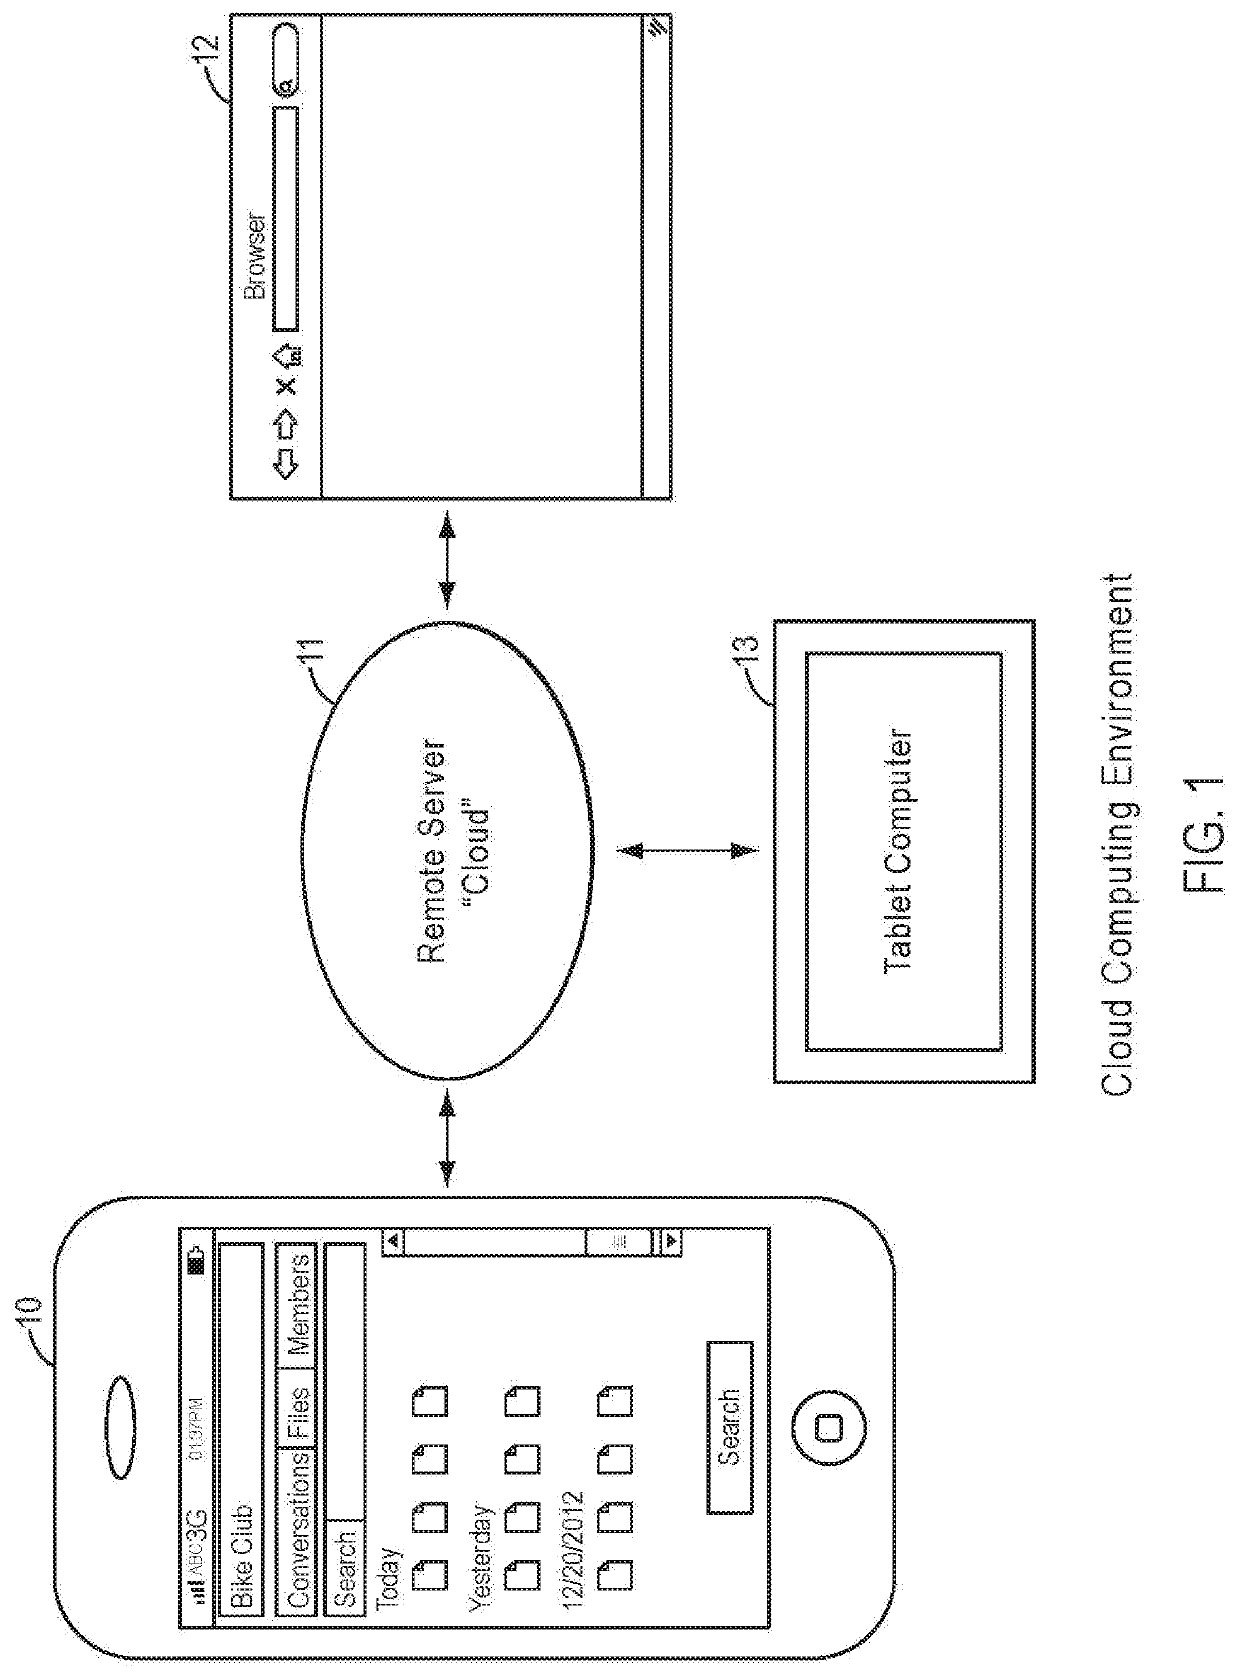 Online Systems and Methods for Advancing Information Organization Sharing and Collective Action